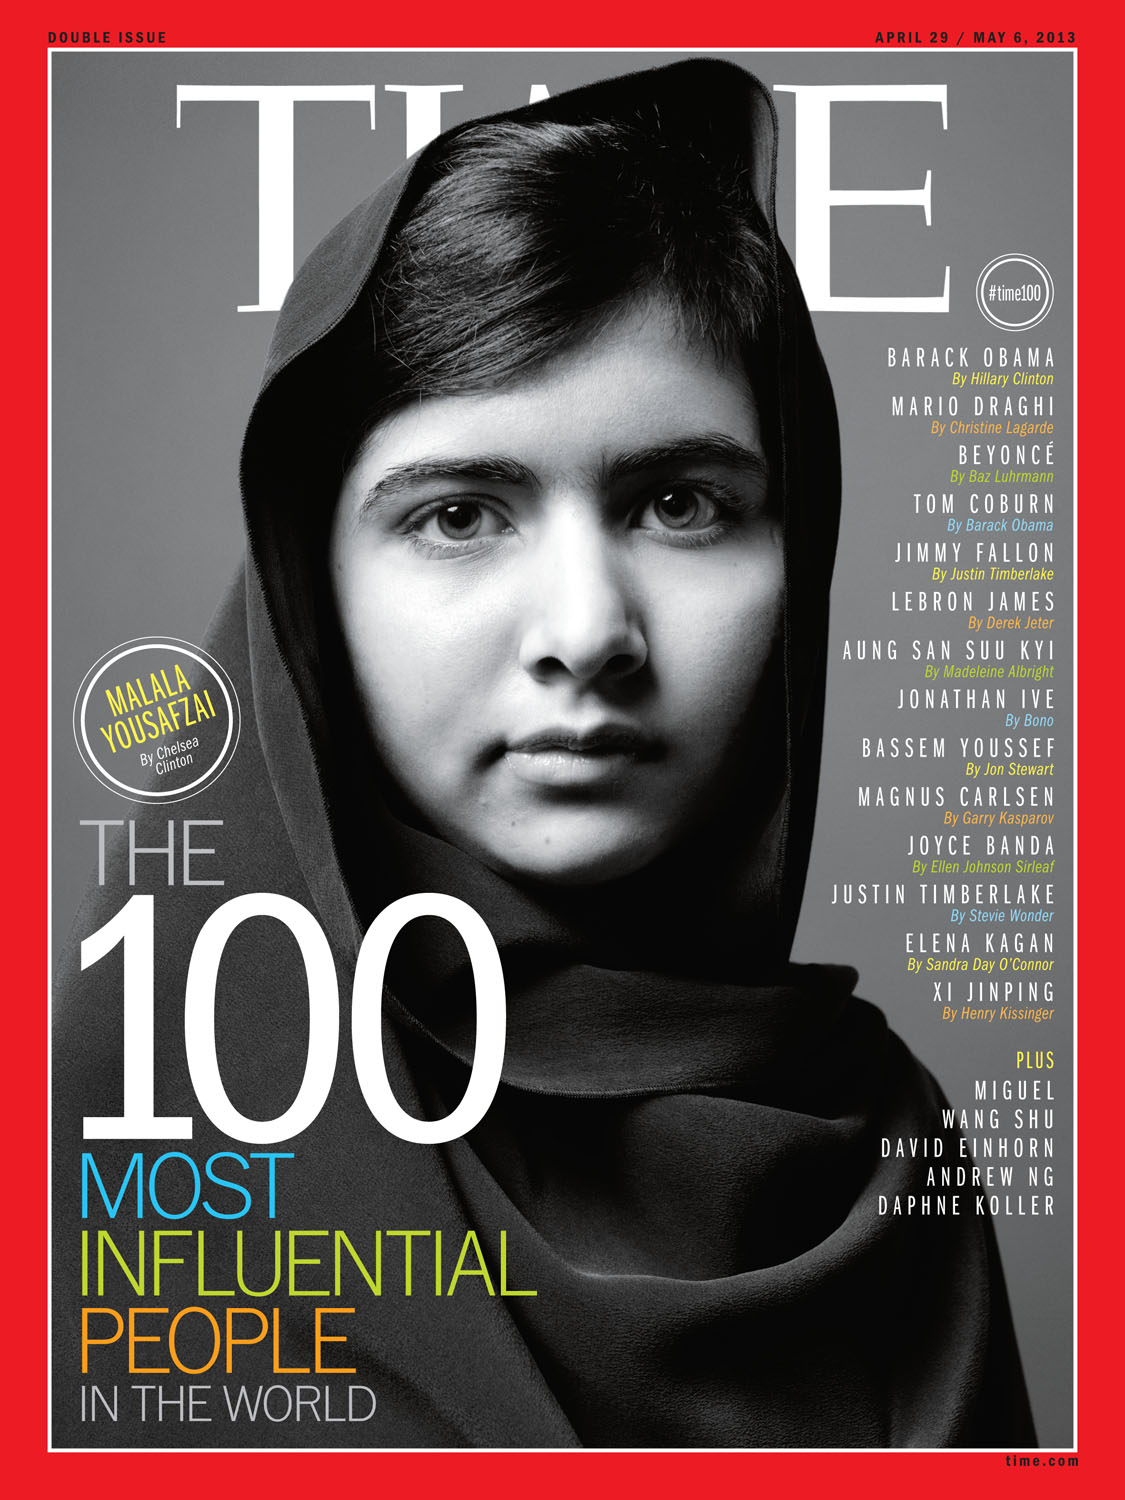 TIME Magazine Cover, April 29 / May 6, 2013